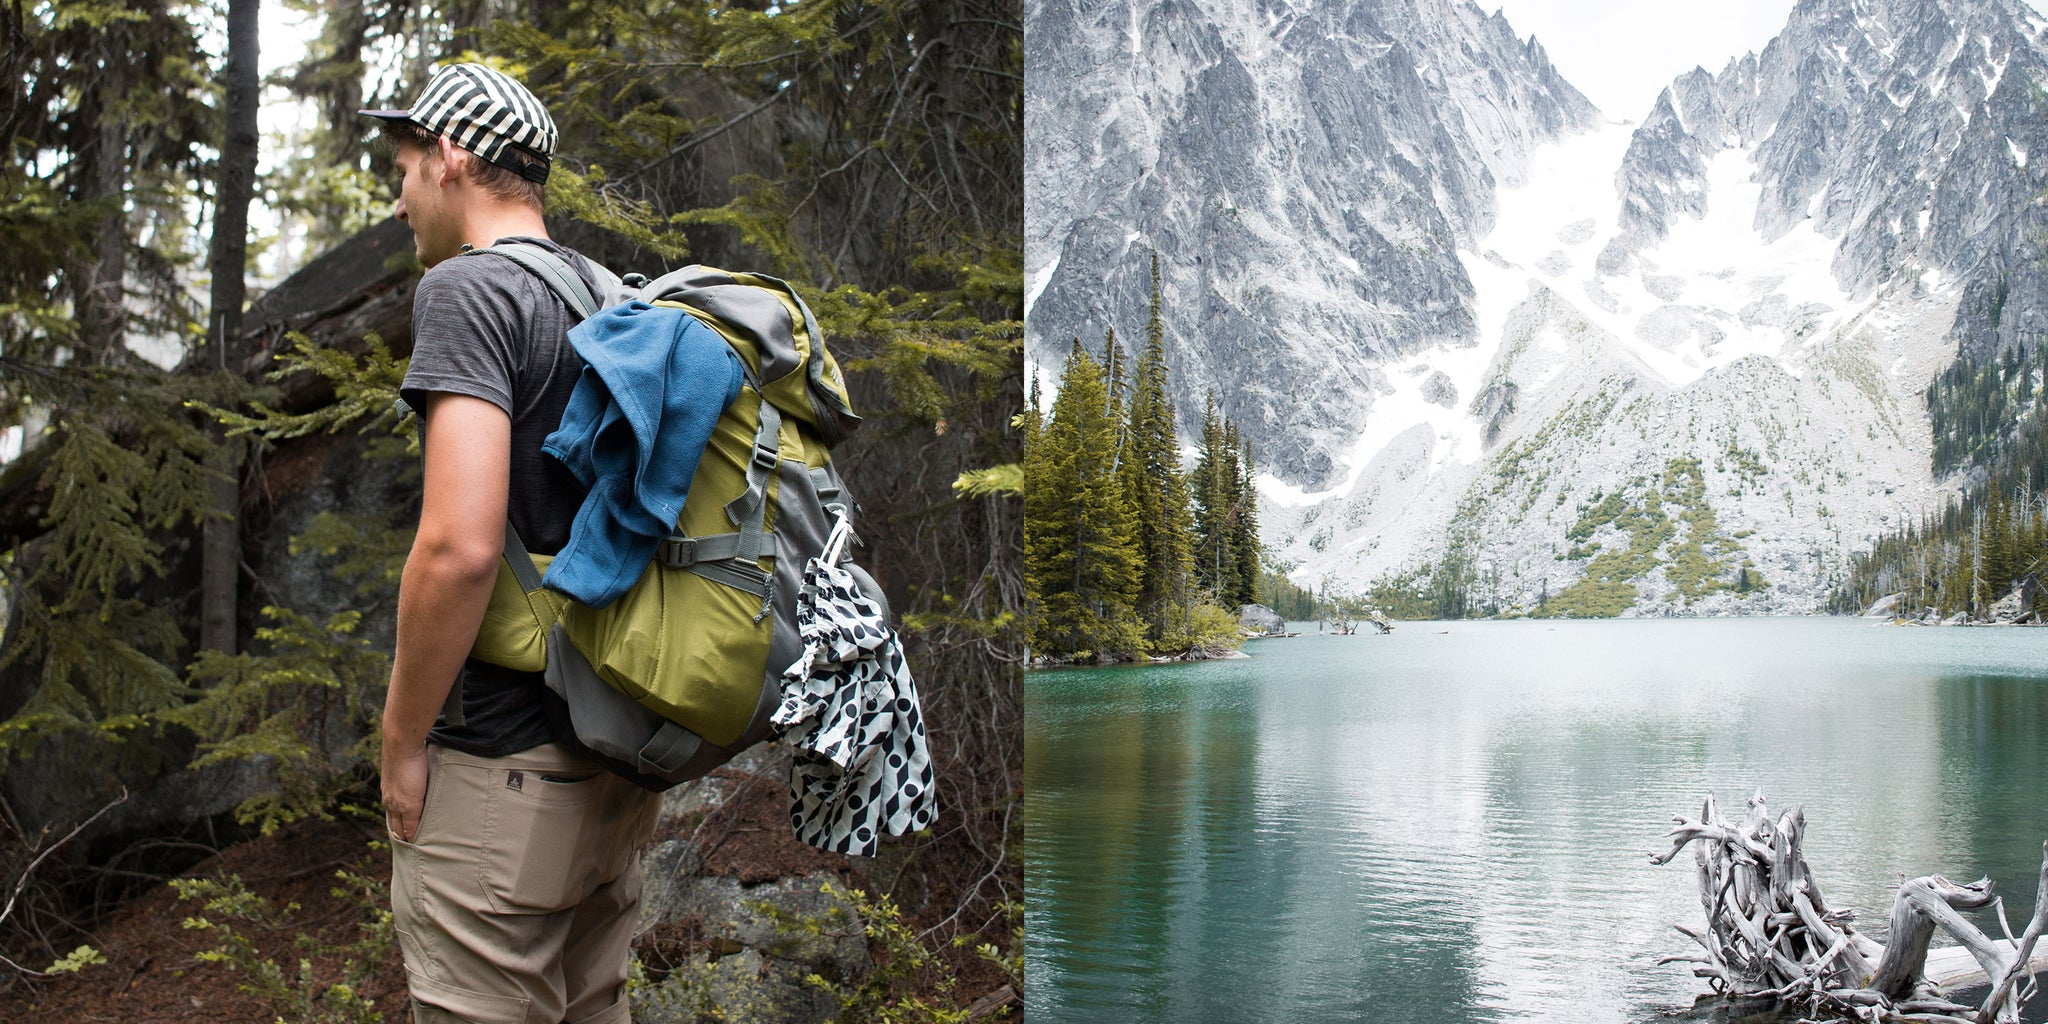 Bather Excellent Adventures Hiking the North Cascades by Tommy Moore